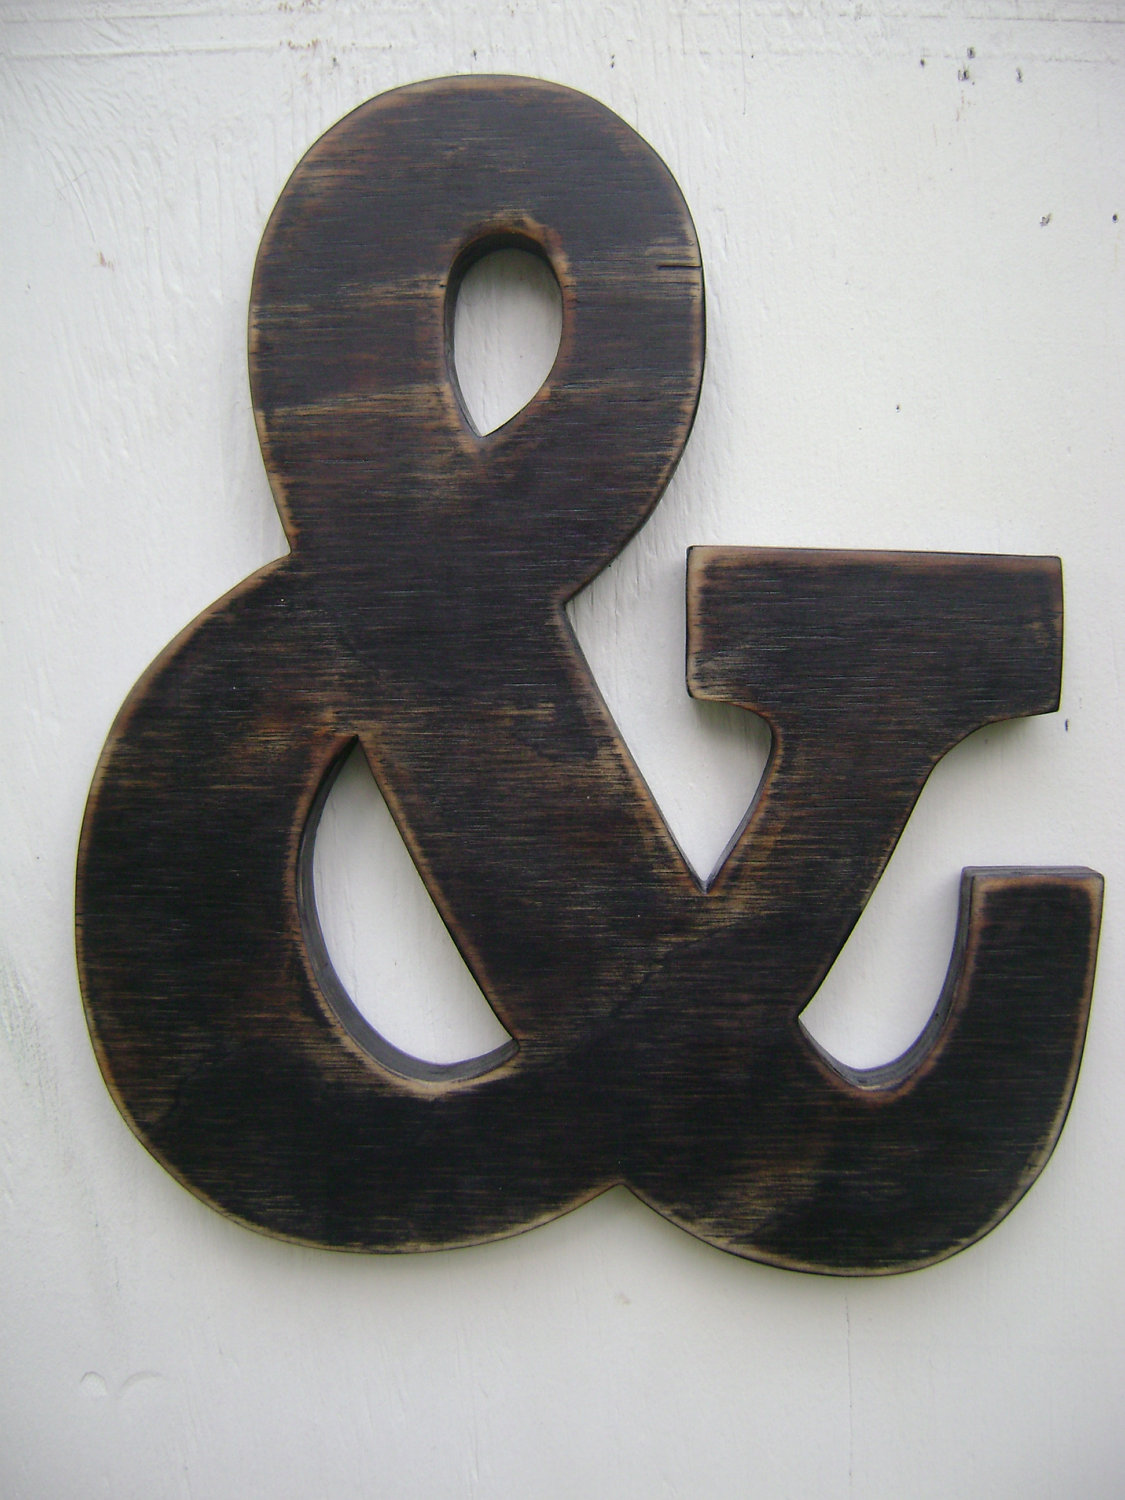 4 Inch Wooden Letter Ampersand Ready for Painting or Decorating